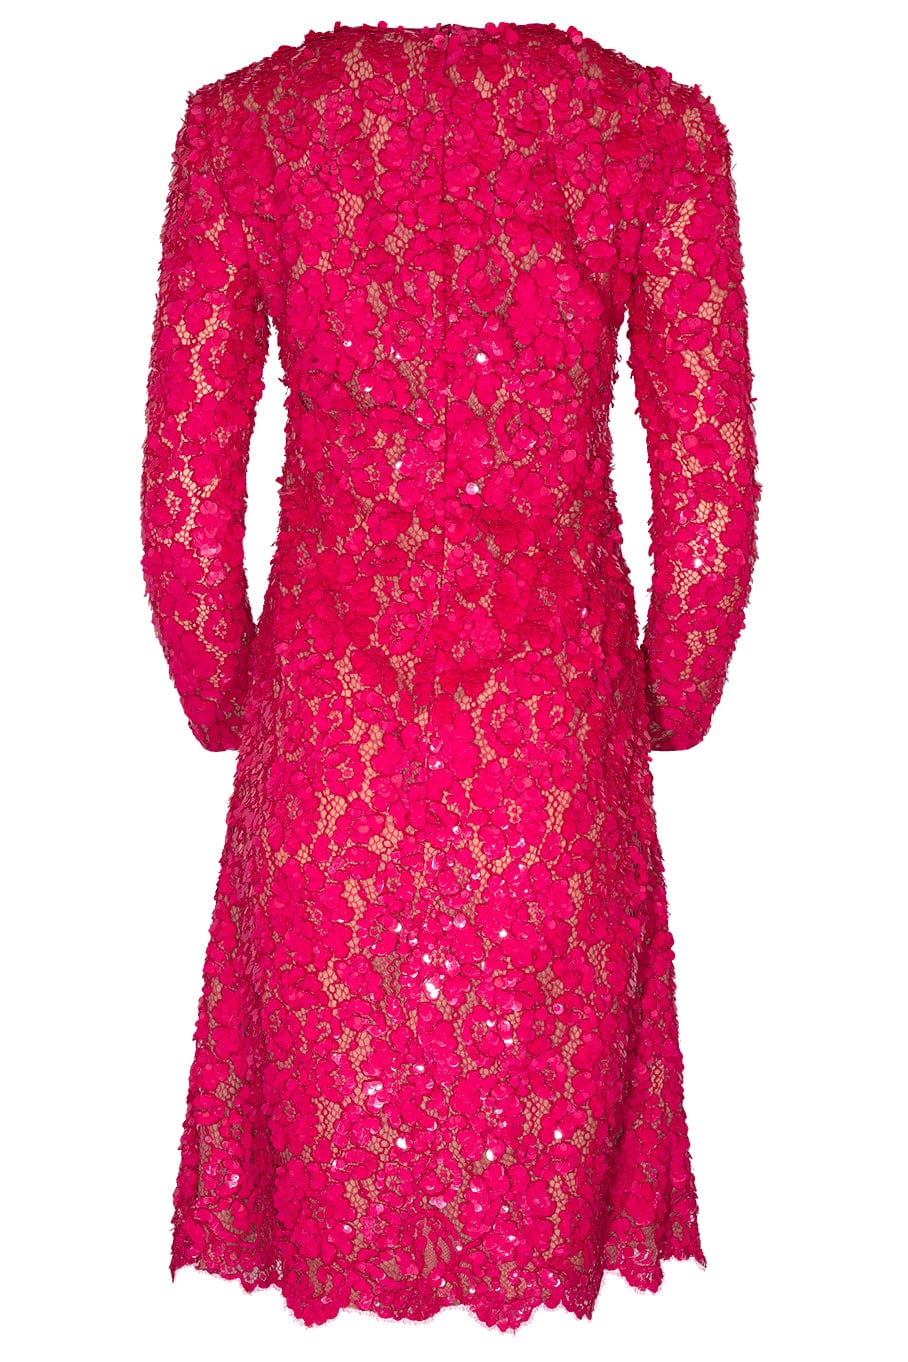 MICHAEL KORS-Paillette Hand Embroidered Dress-